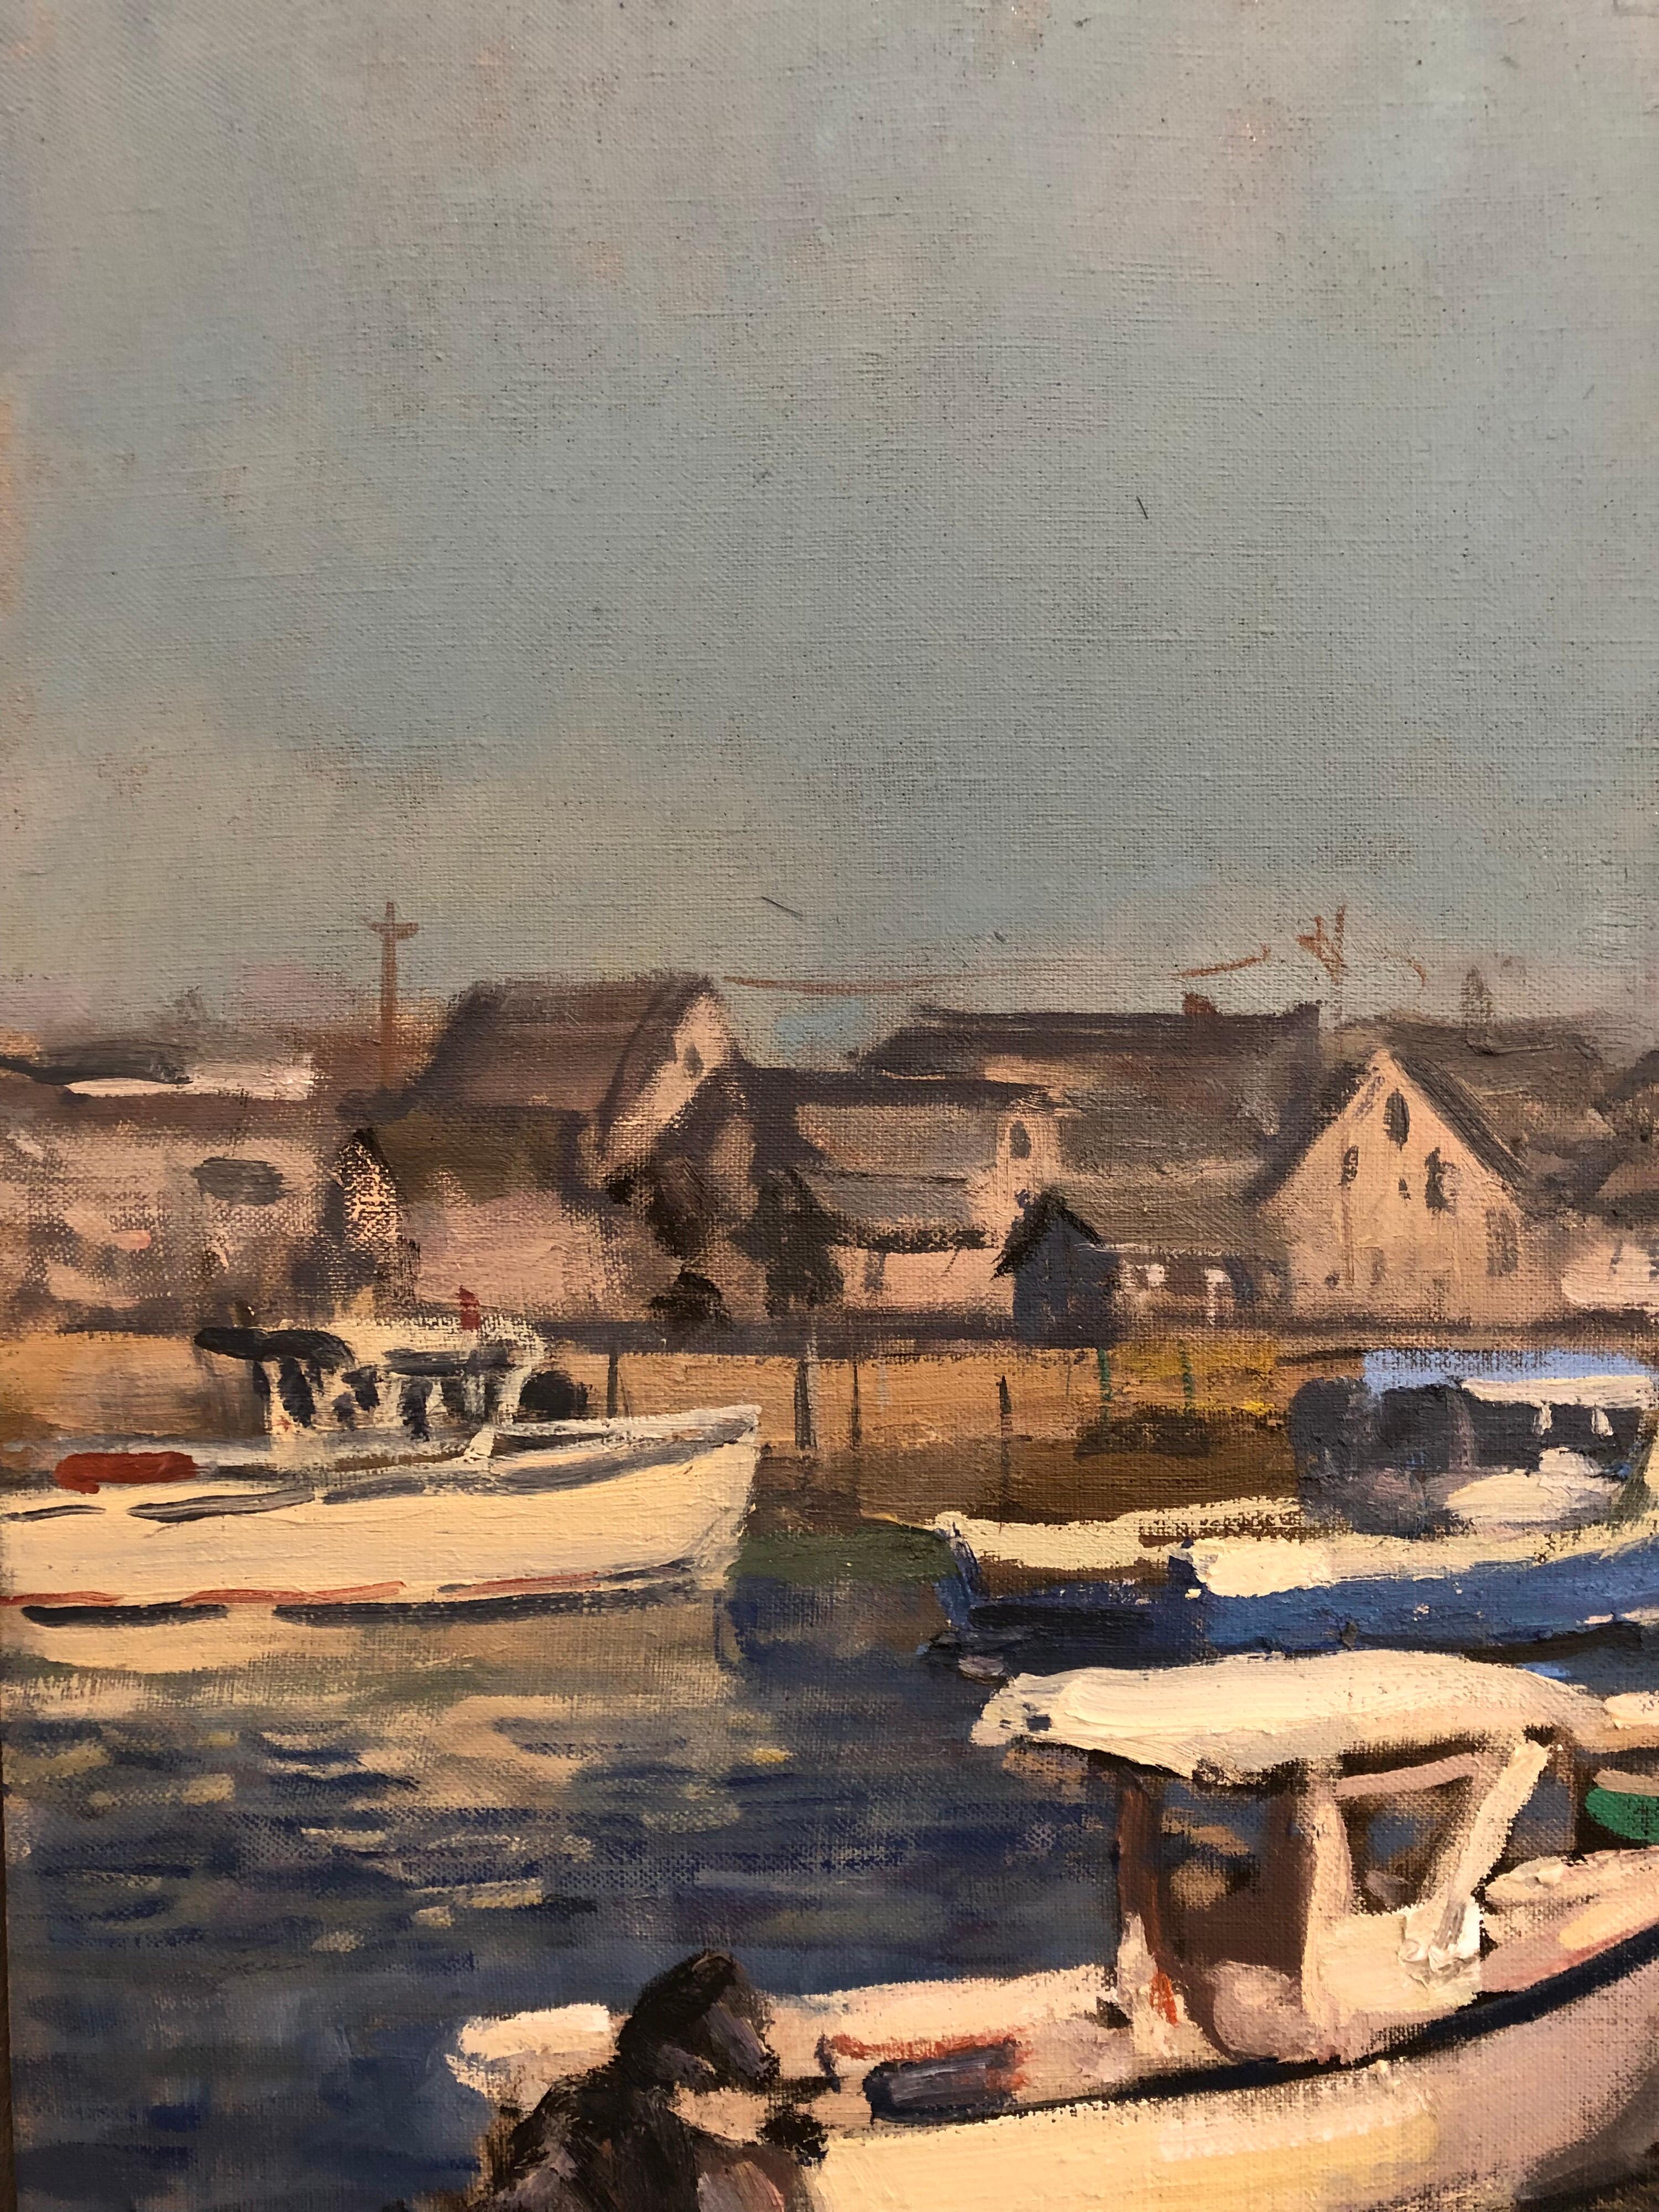 Rockport, MA has been a prominent plein air spot for painters for over a century. Butko's painting of moored boats at T-Wharf shows a bright summer morning, with brilliant blue water and an iconic red shack on the docks.
Viktor Butko was born in